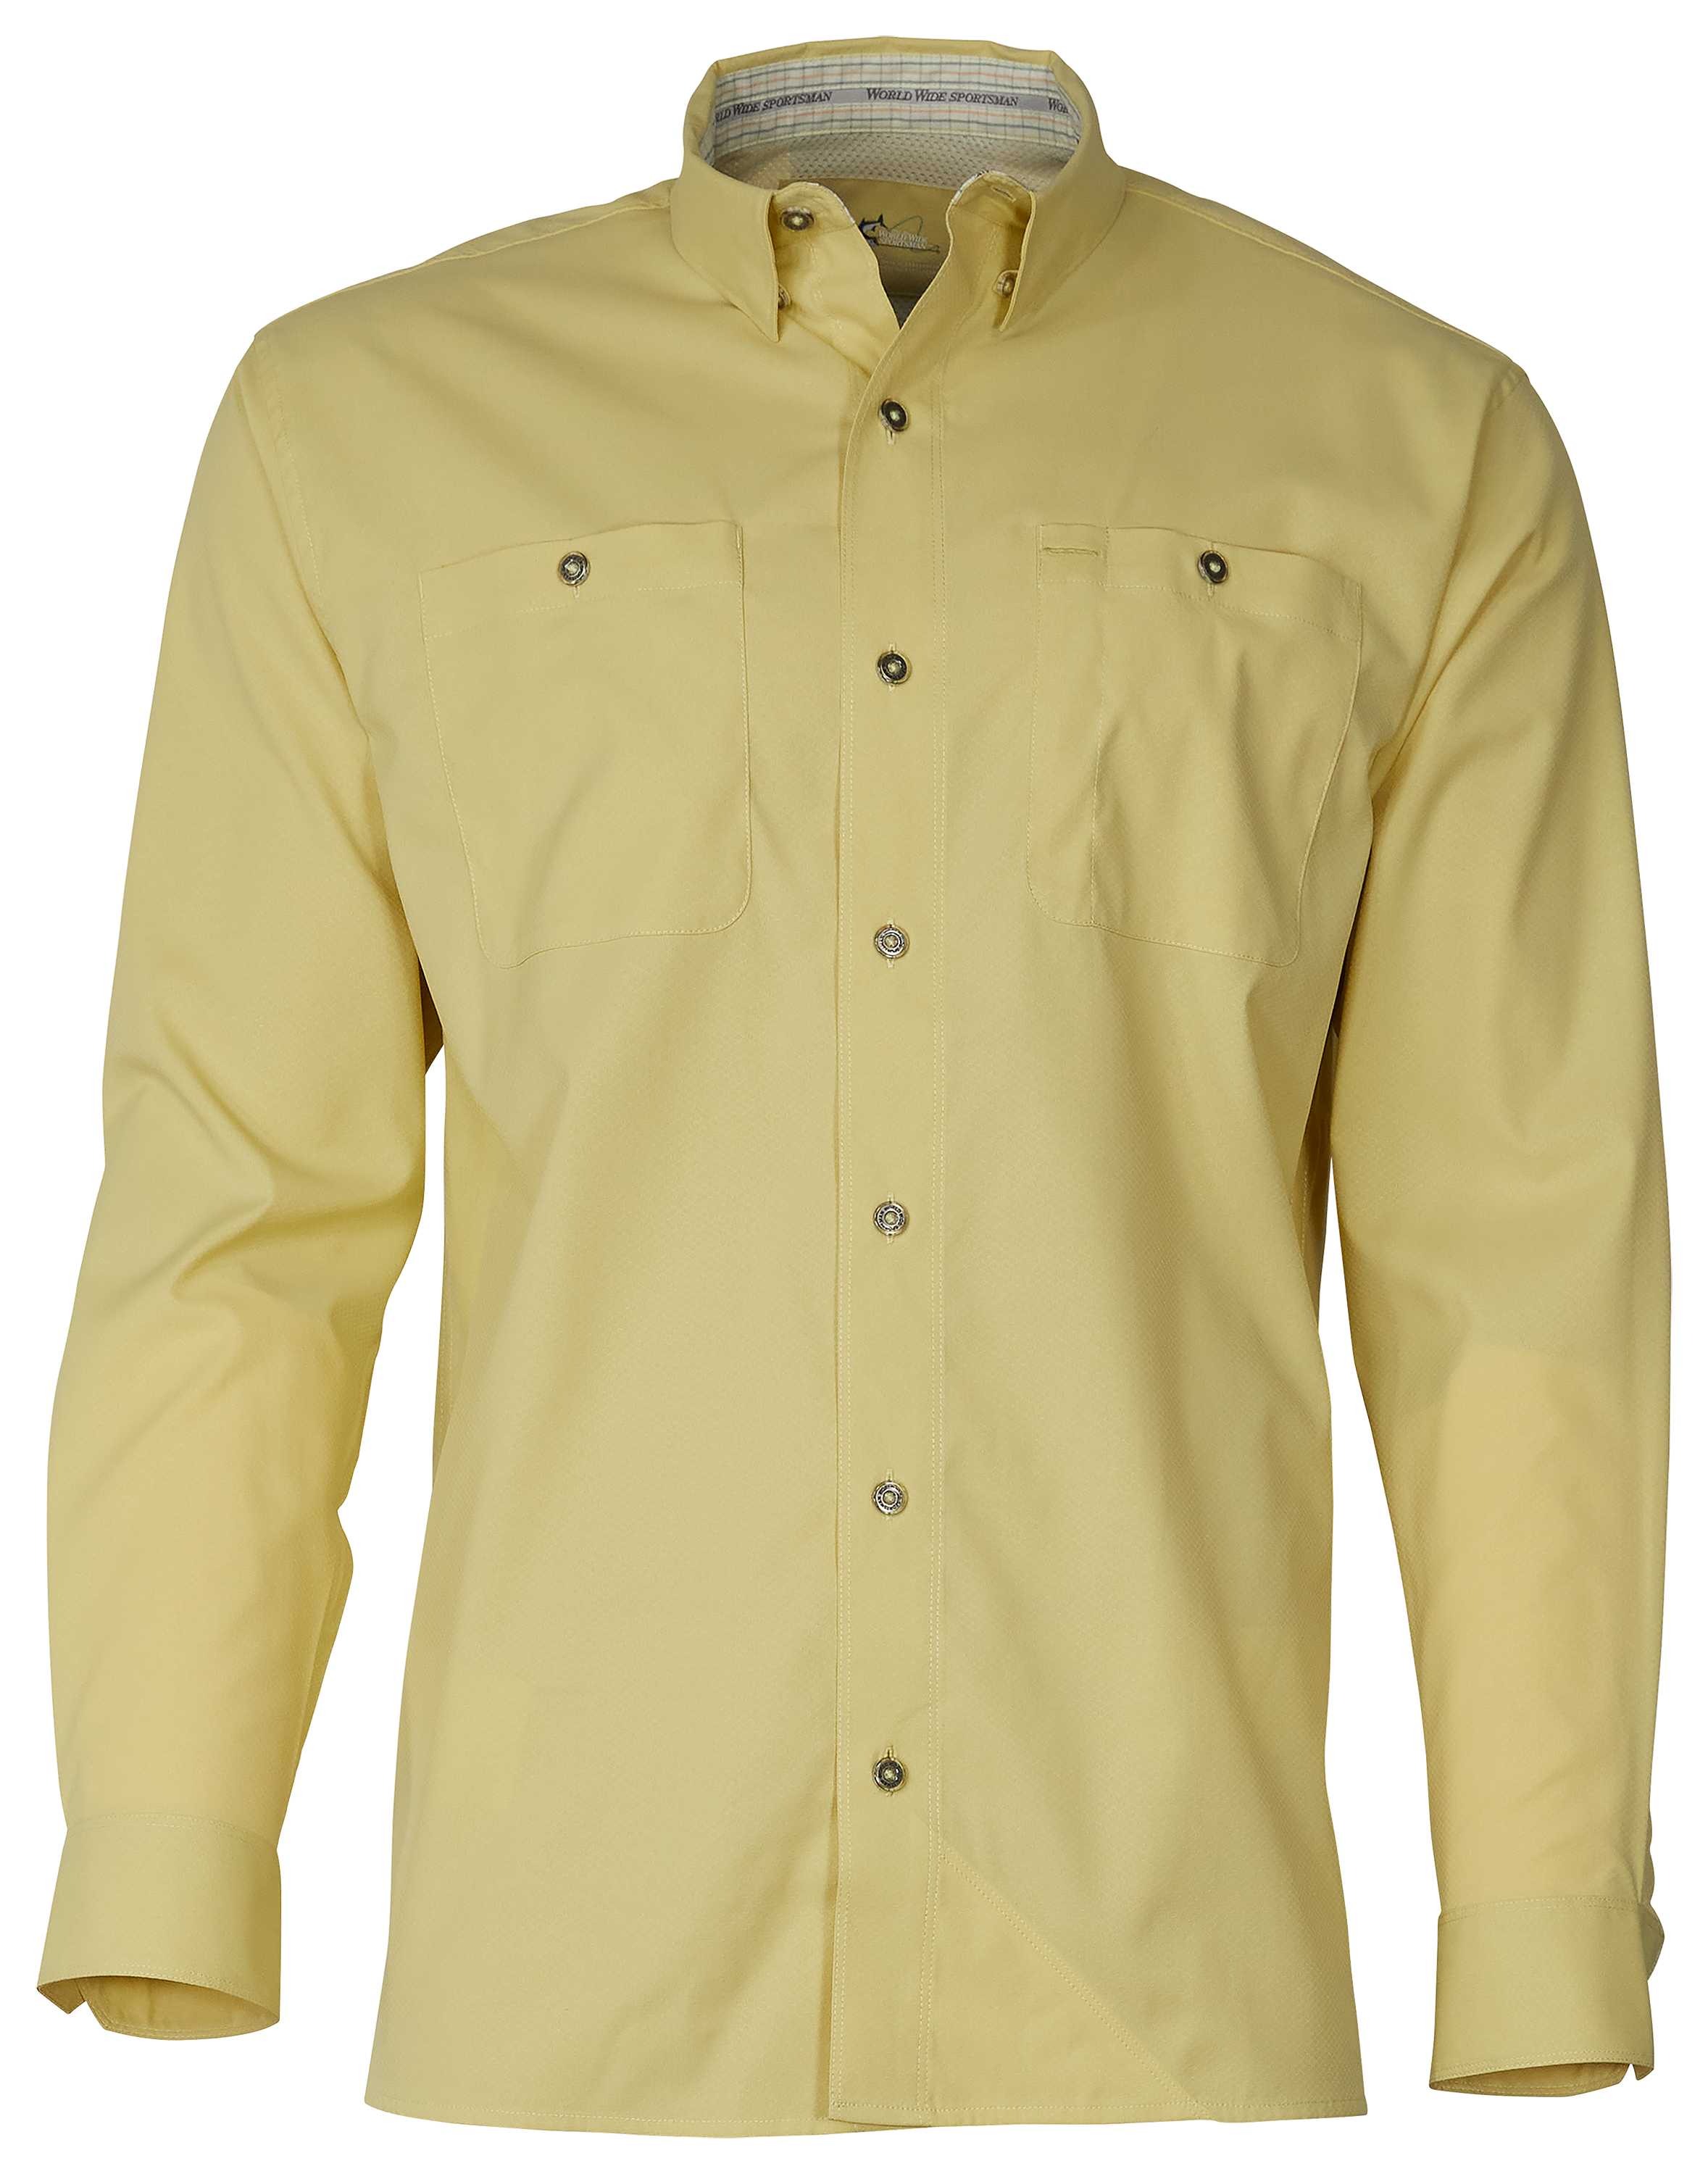 World Wide Sportsman Mens L Vented Cotton Fishing Shirt Long Sleeve Button  MS5